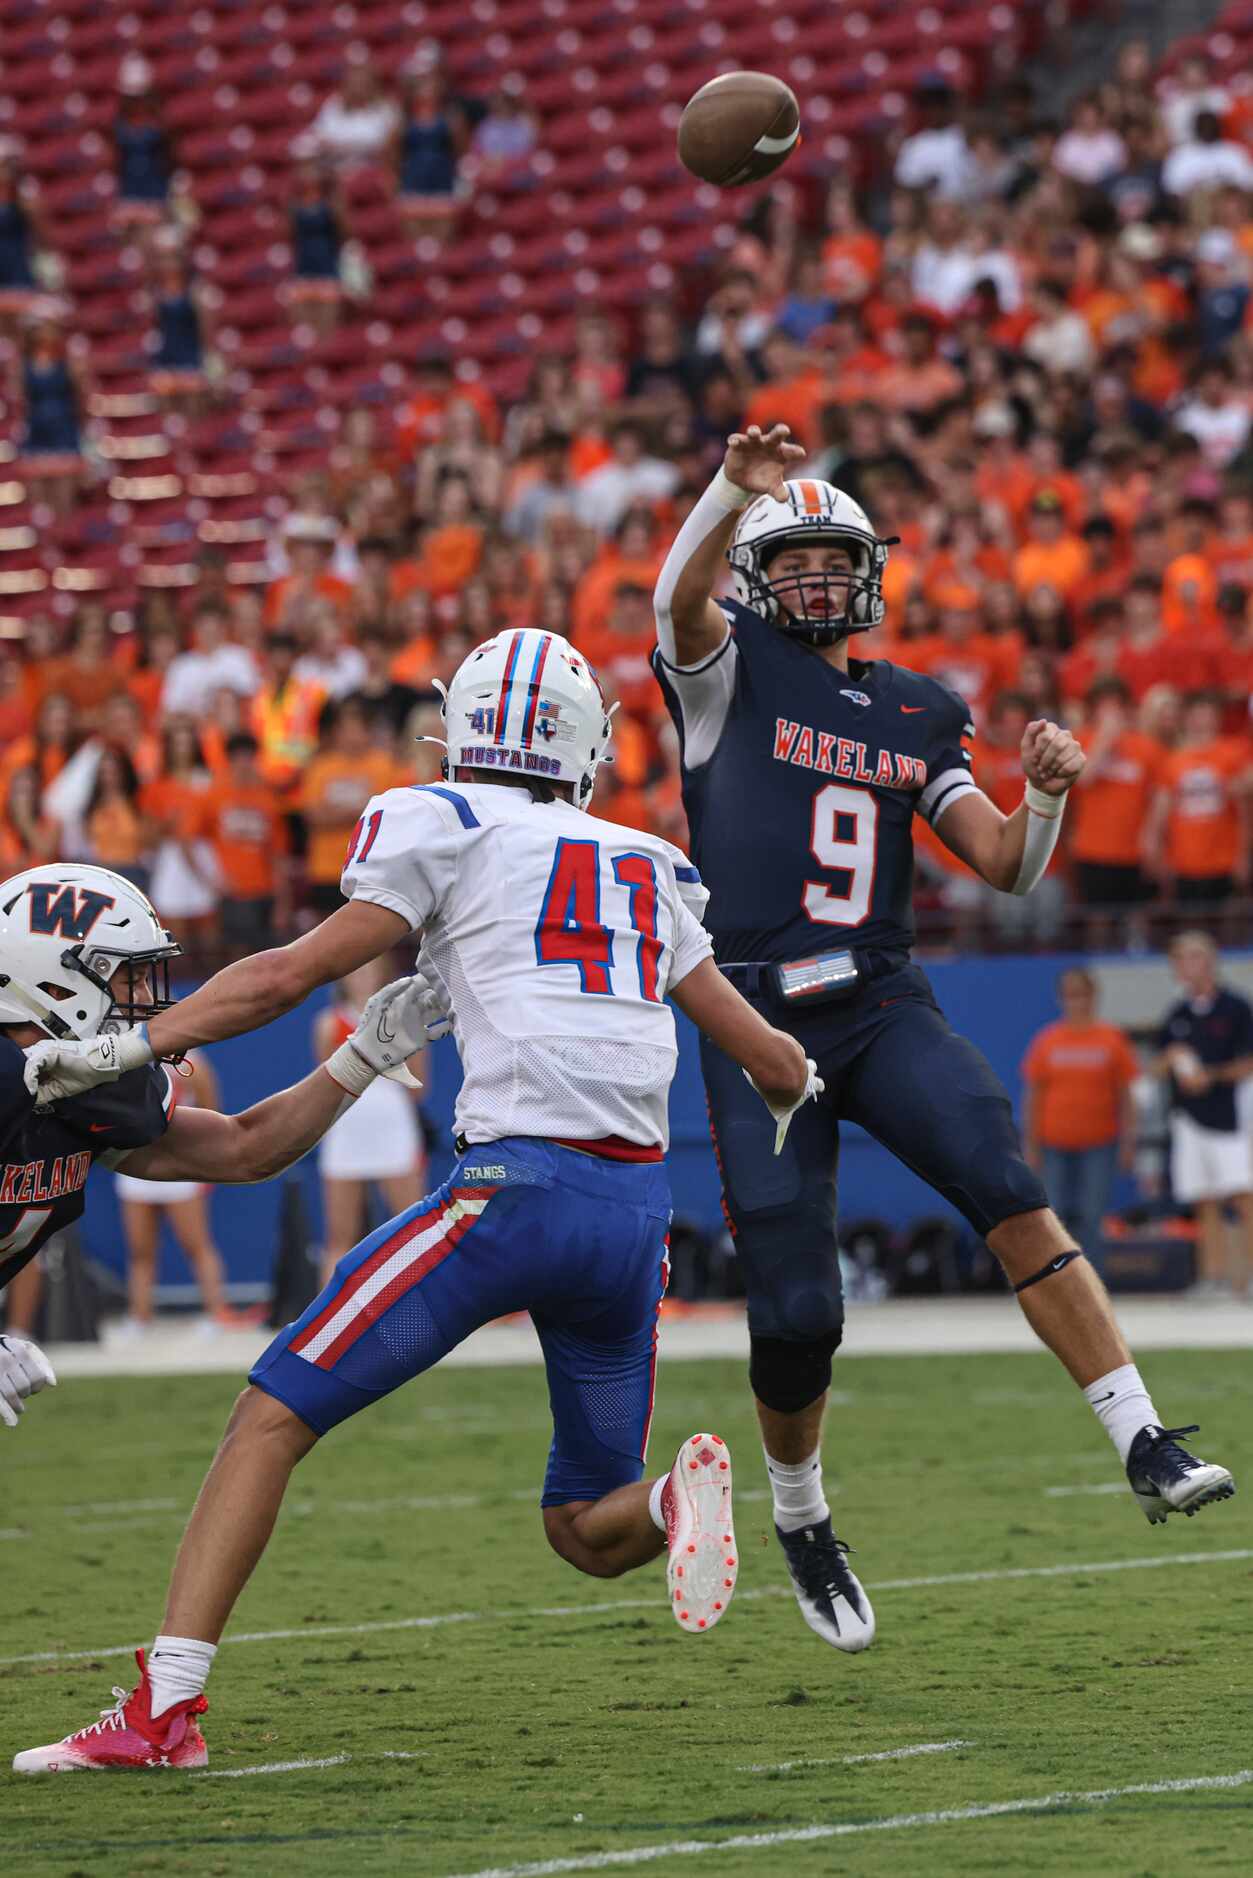 Wakeland High School’s Quarterback Brennan Myer throws a pass during the first quarter of...